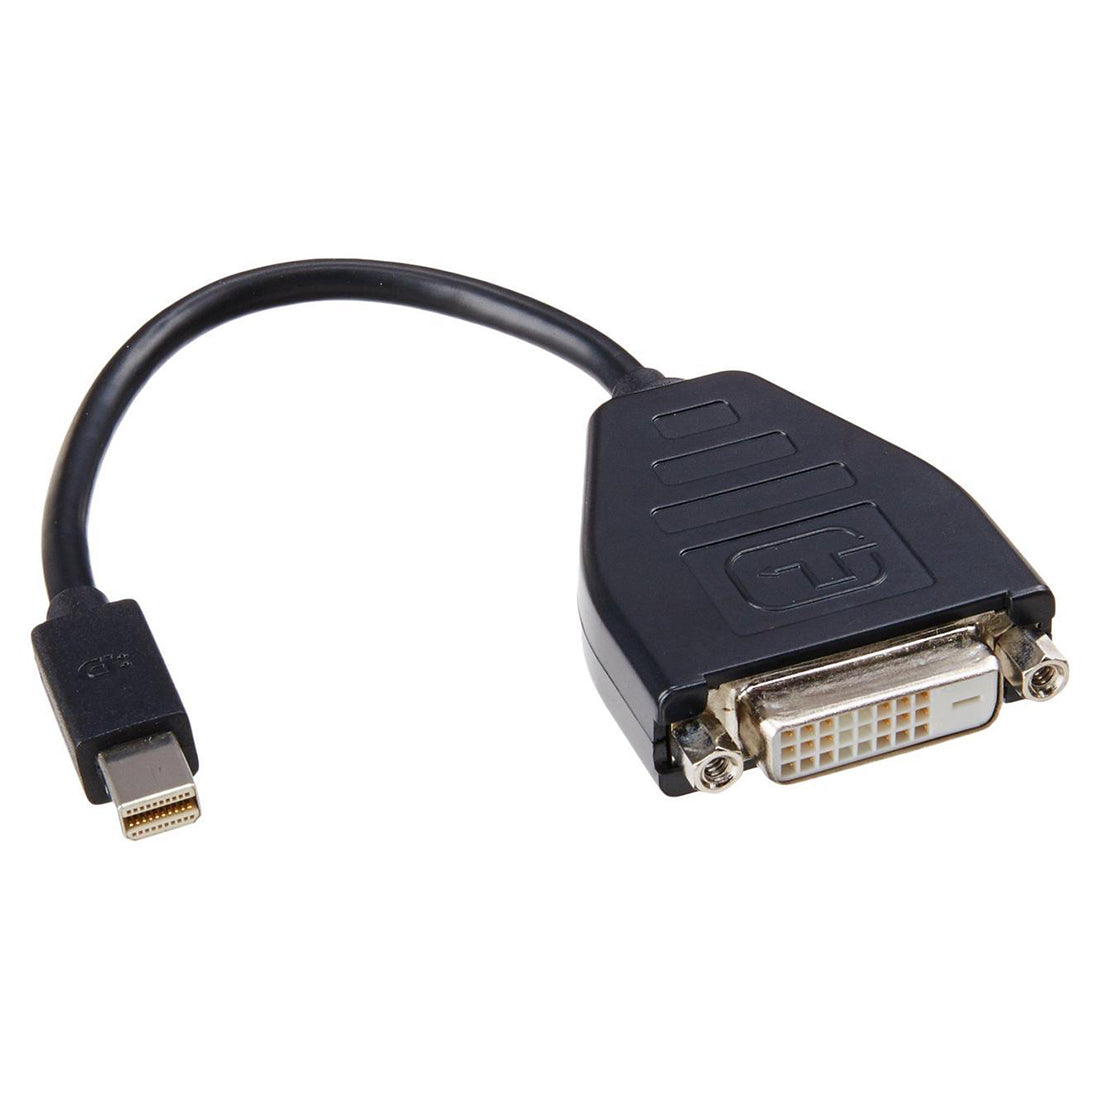 Lenovo Mini-DisplayPort to Single Link DVI Adapter with Resolution Up to1920 x 1200 at 60 Hz